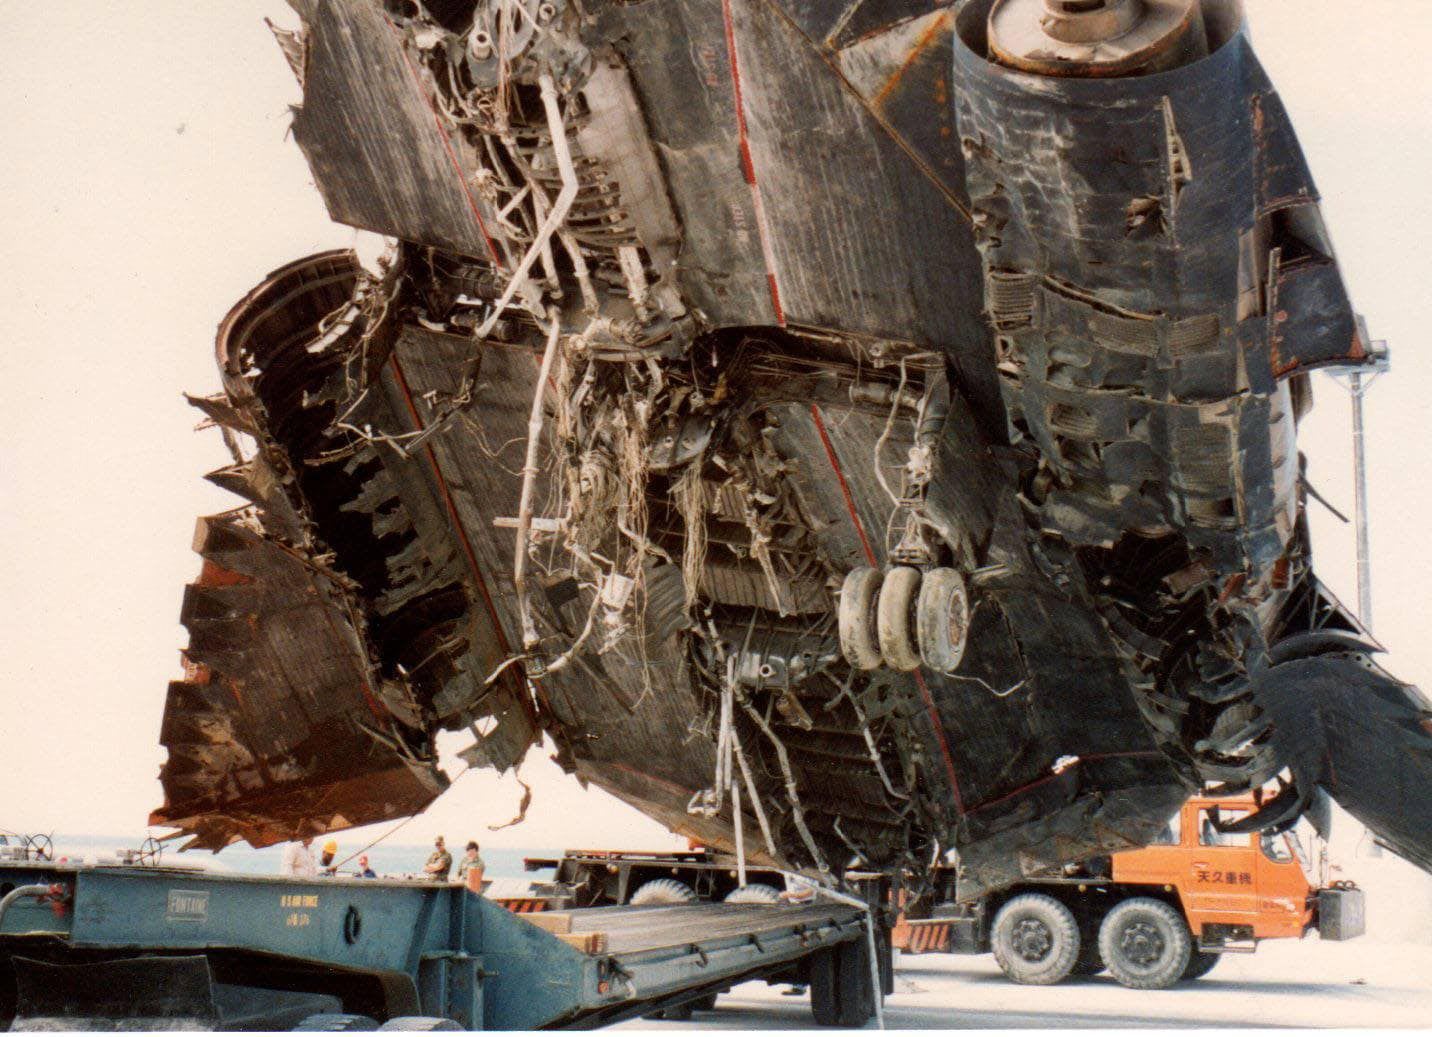 Wreckage of SR-71 #61-7974 aka 'Ichi-Ban', Apr. 1989, later buried at sea in the Mariana Trench.